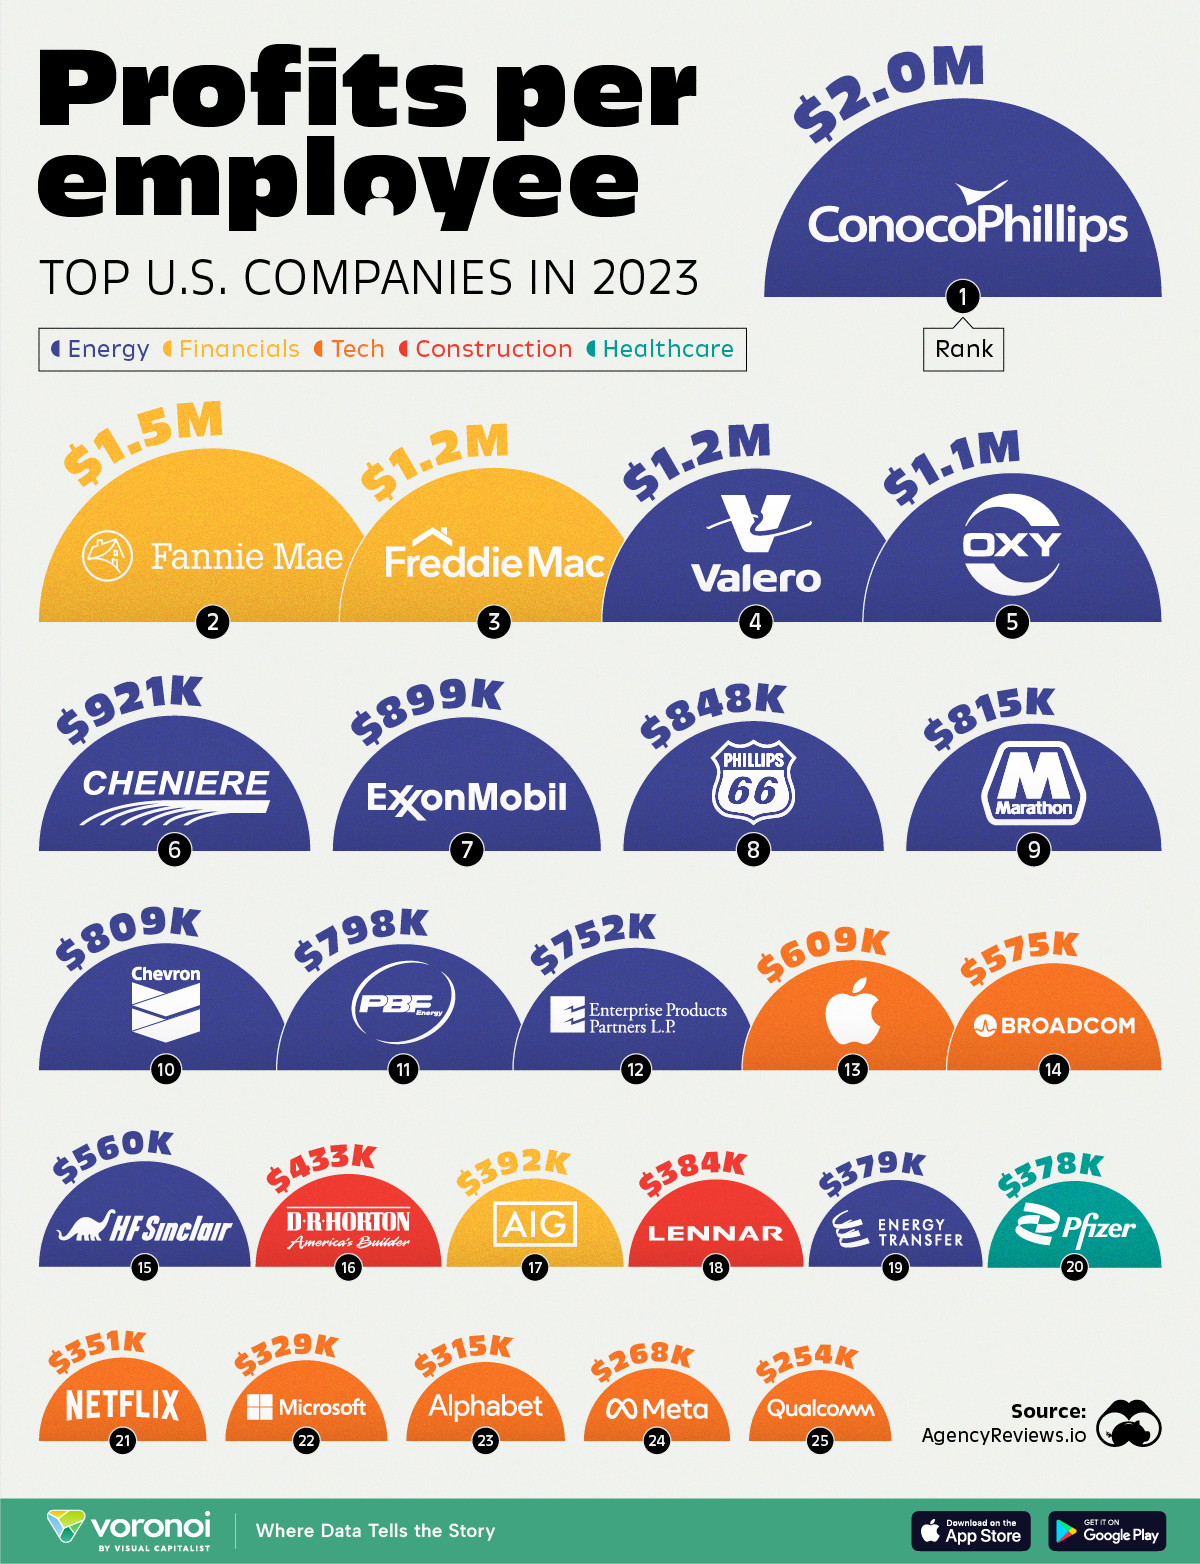 Ranked: Top U.S. Companies, by Profit per Employee